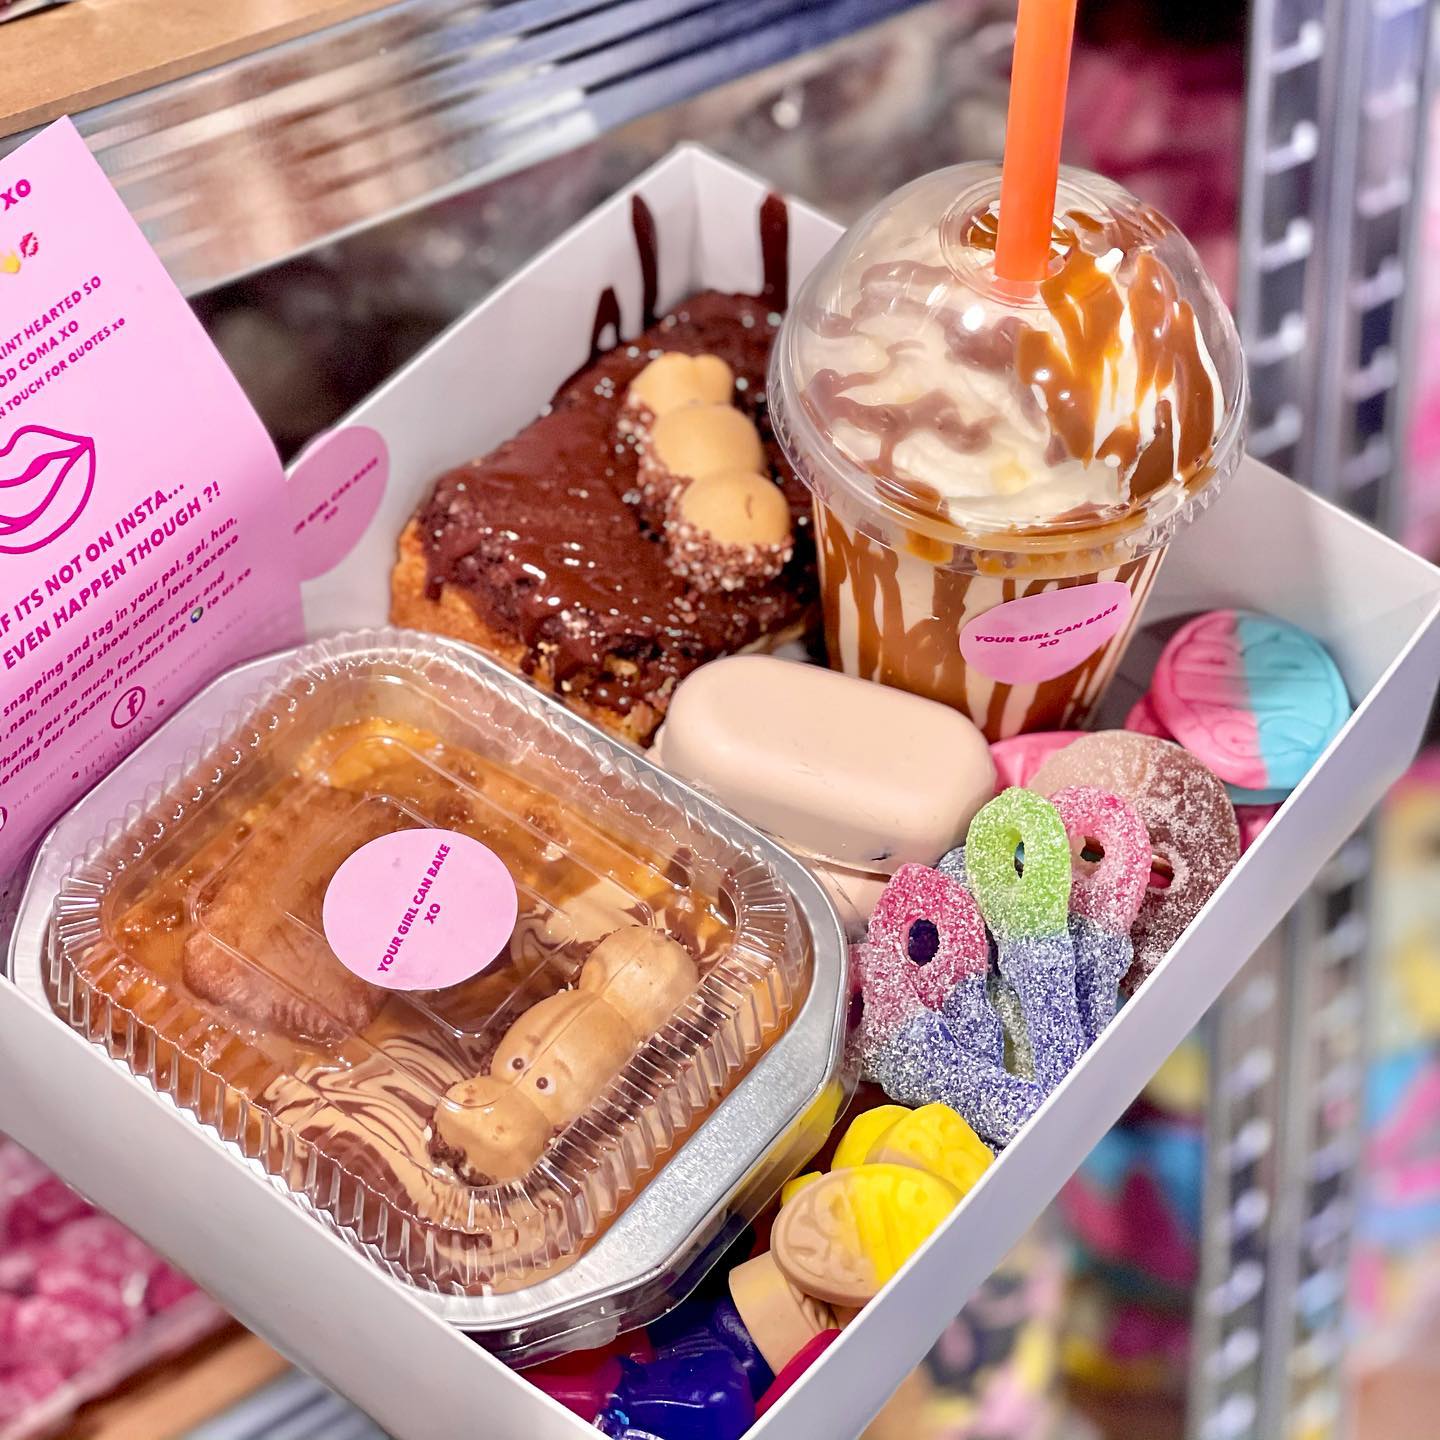 A new drive-thru dessert shop has opened up in Manchester, The Manc